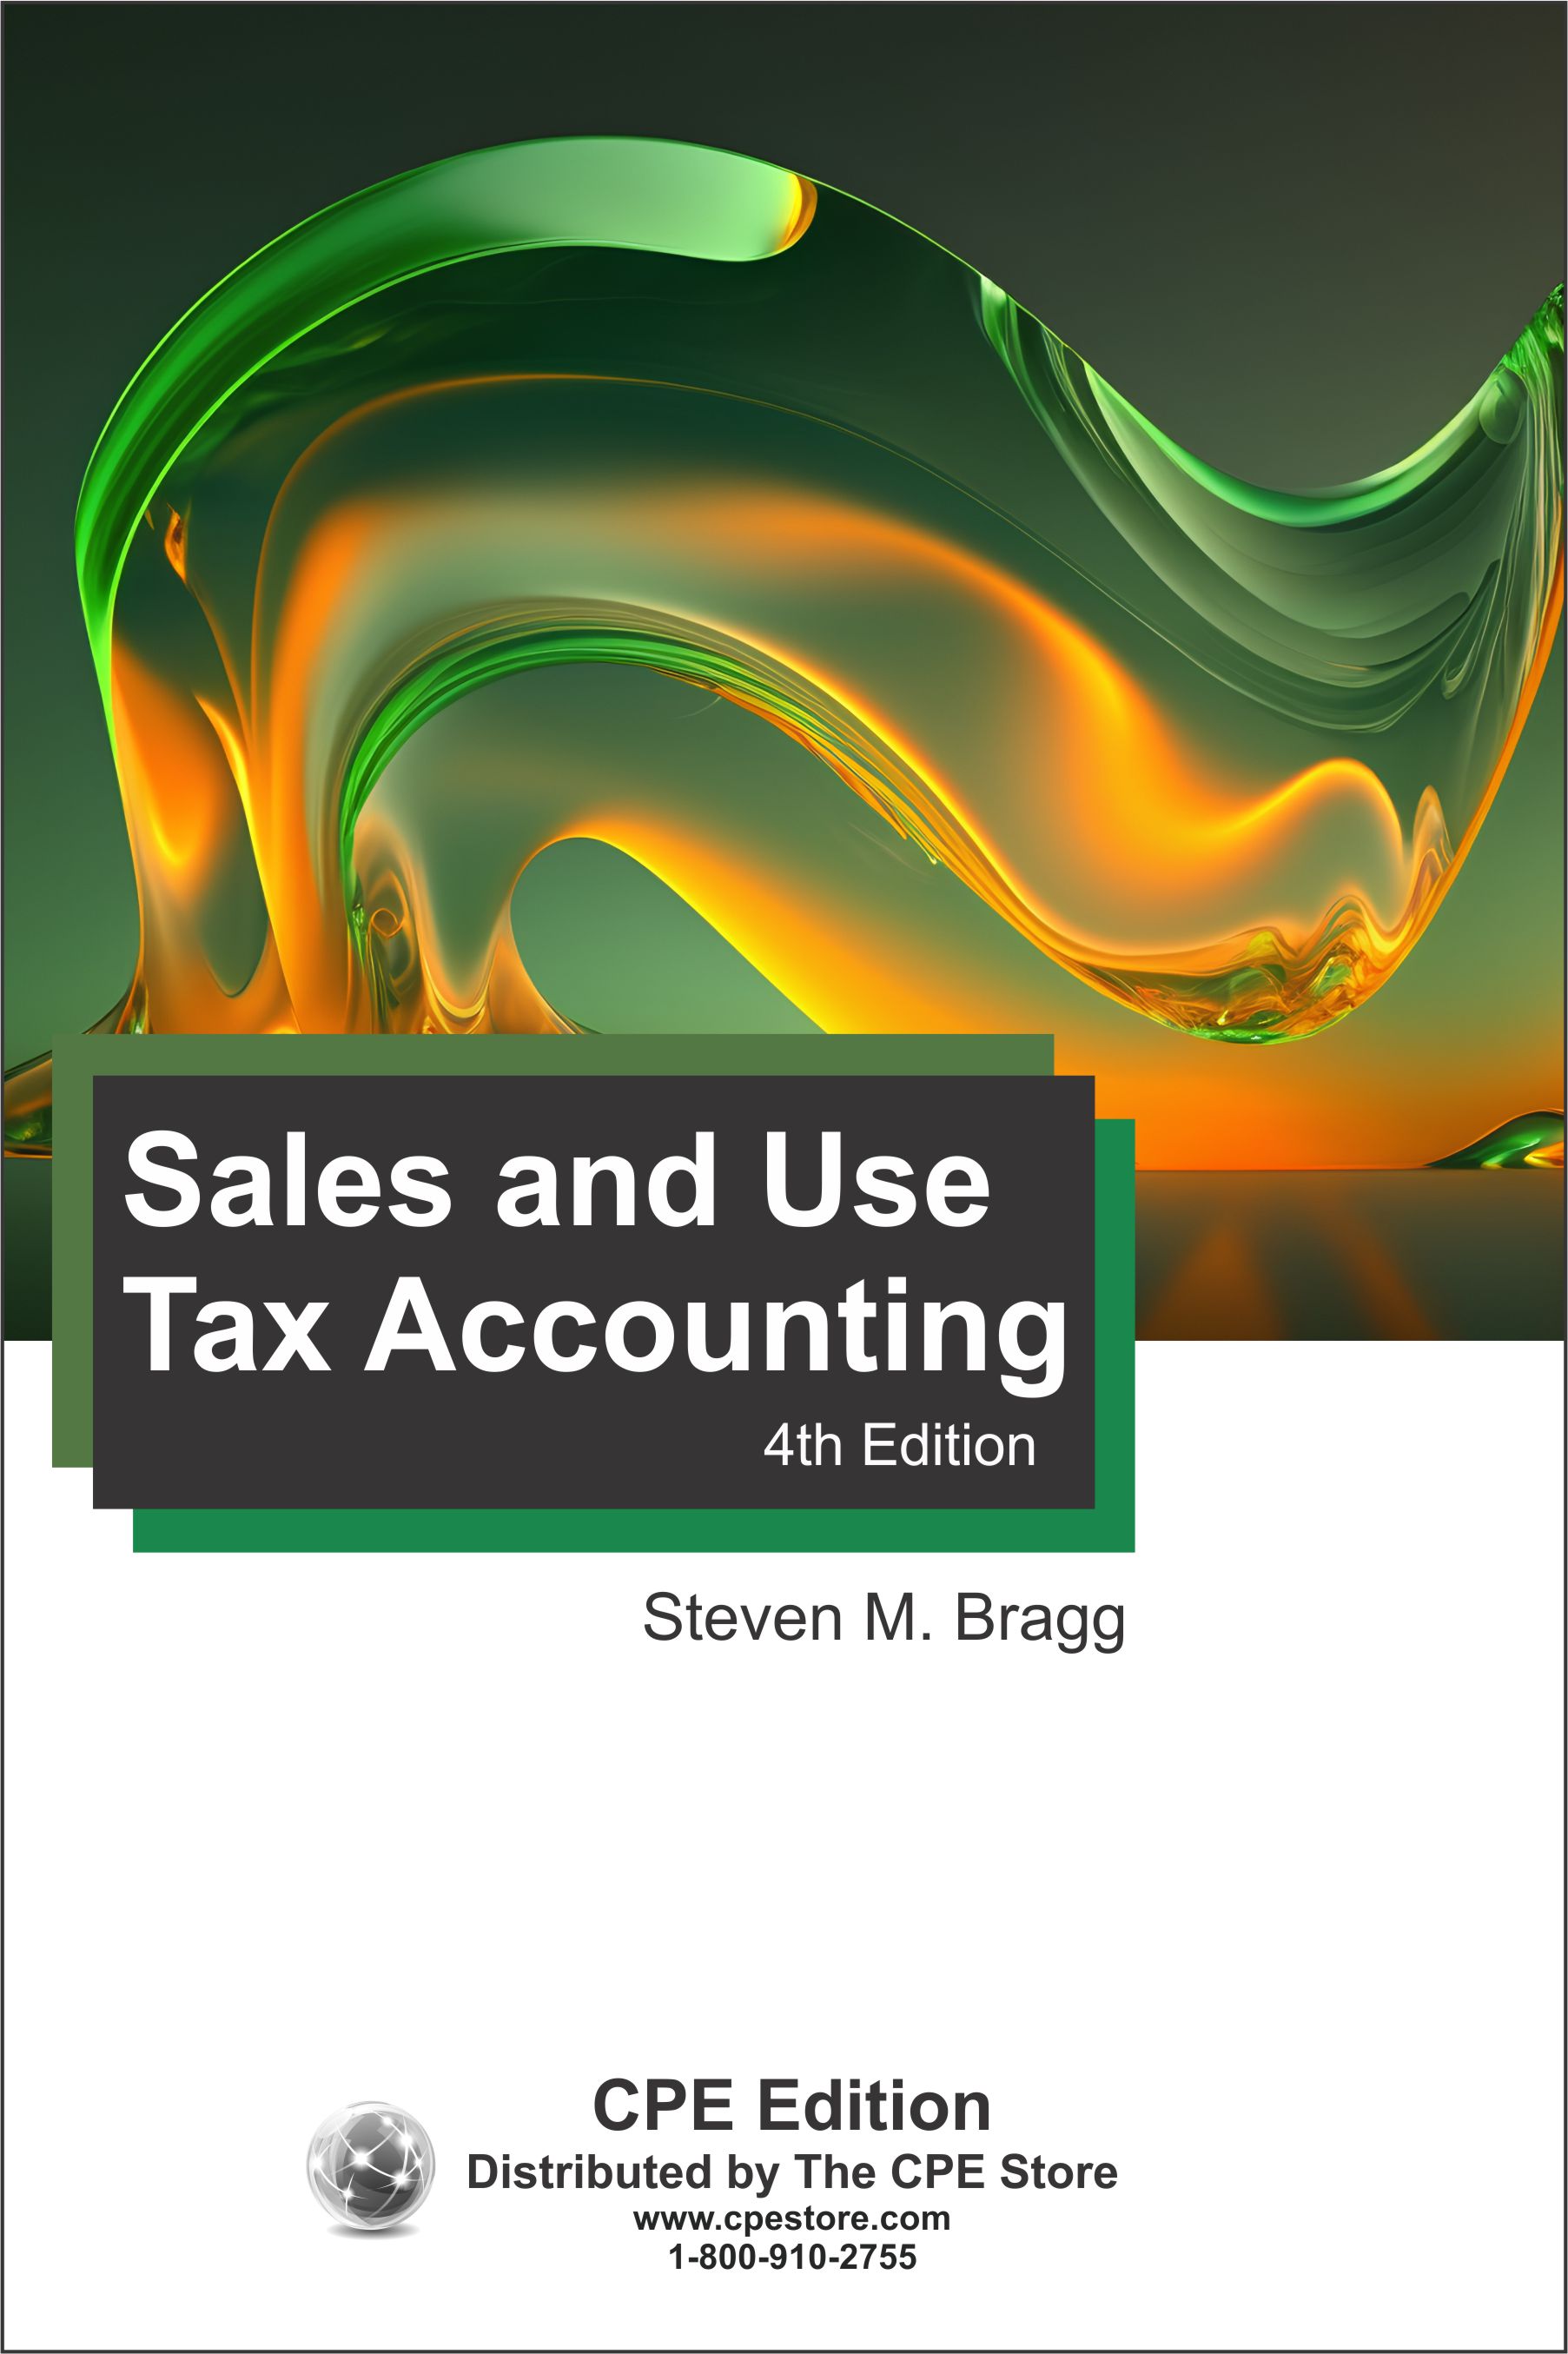 Sales and Use Tax Accounting